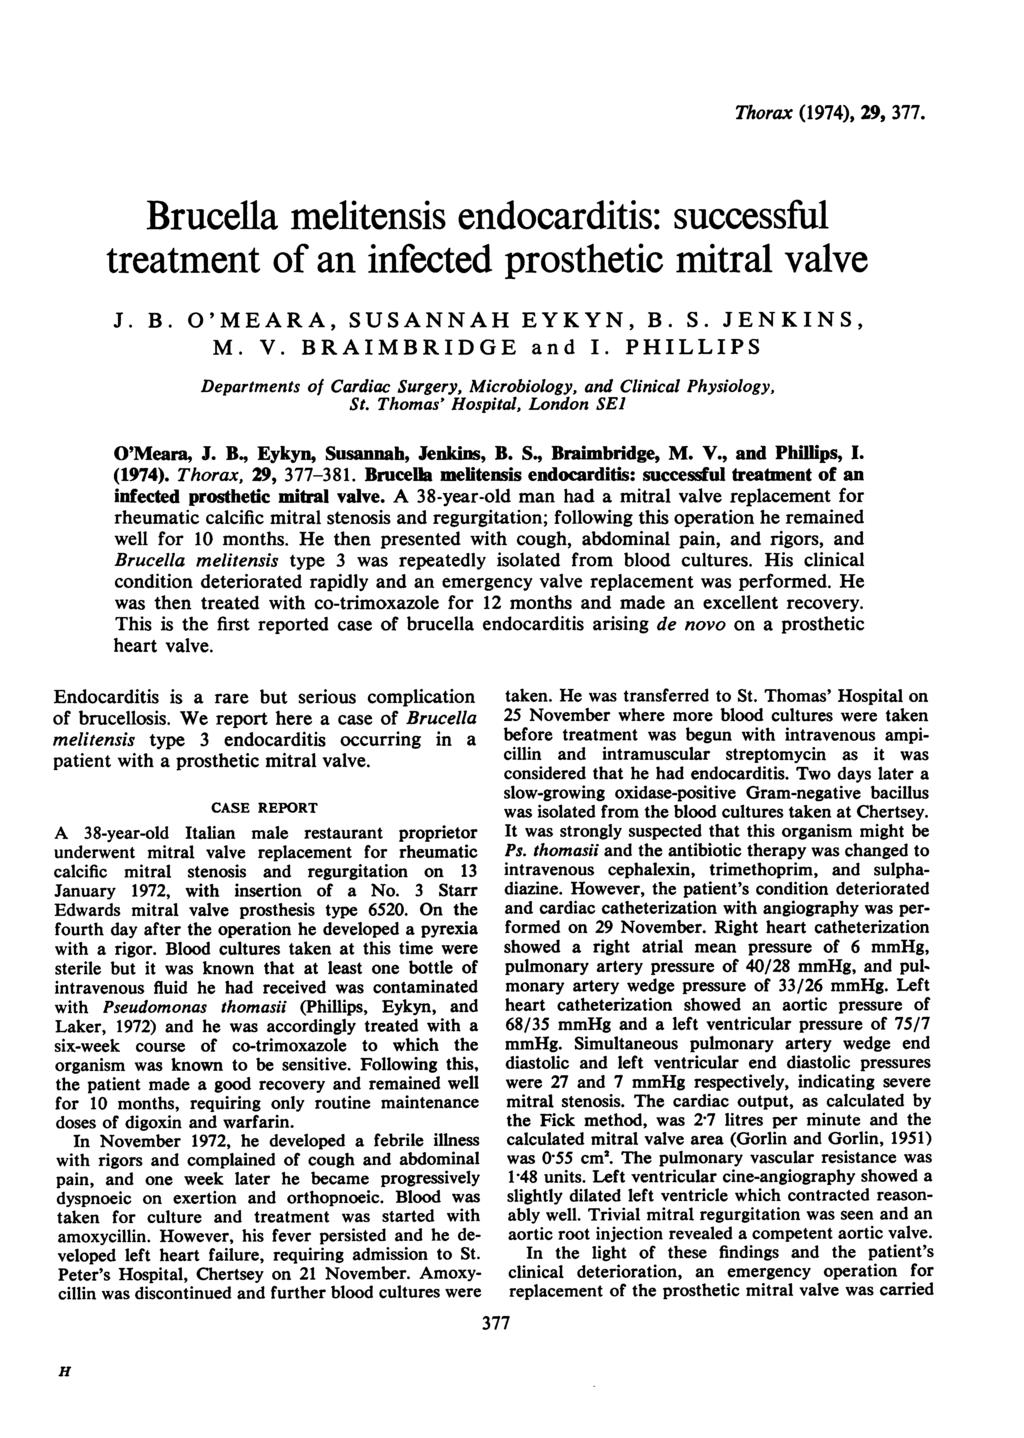 Thorax (1974), 29, 377. Brucella melitensis endocarditis: successful treatment of an infected prosthetic mitral valve J. B. O'MEARA, SUSANNAH EYKYN, B. S. JENKINS, M. V. BRAIMBRIDGE and I.